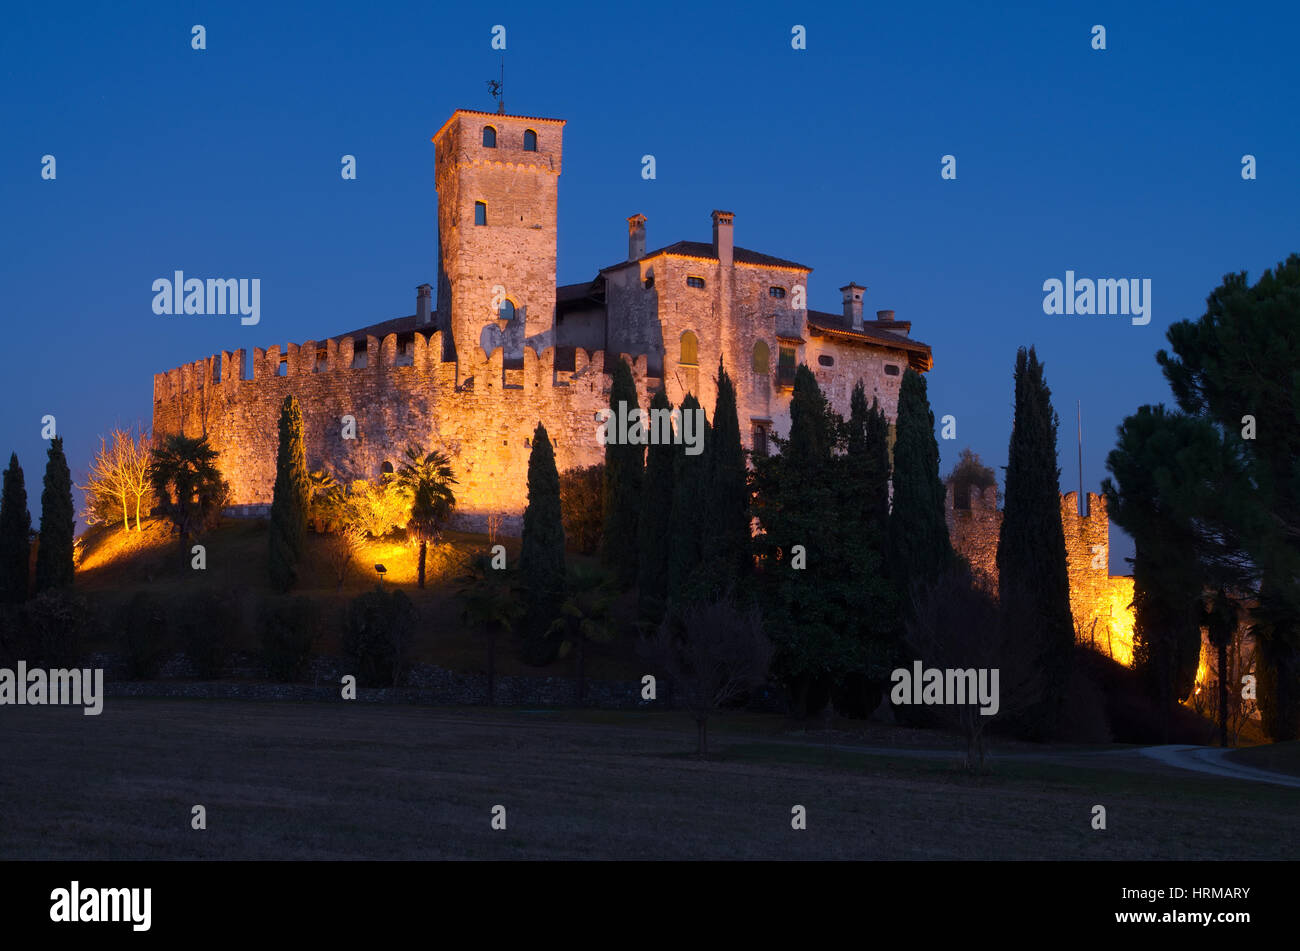 Castle of Villalta, Fagagna, Friuli, Italy, at the bluehour after the sunset Stock Photo